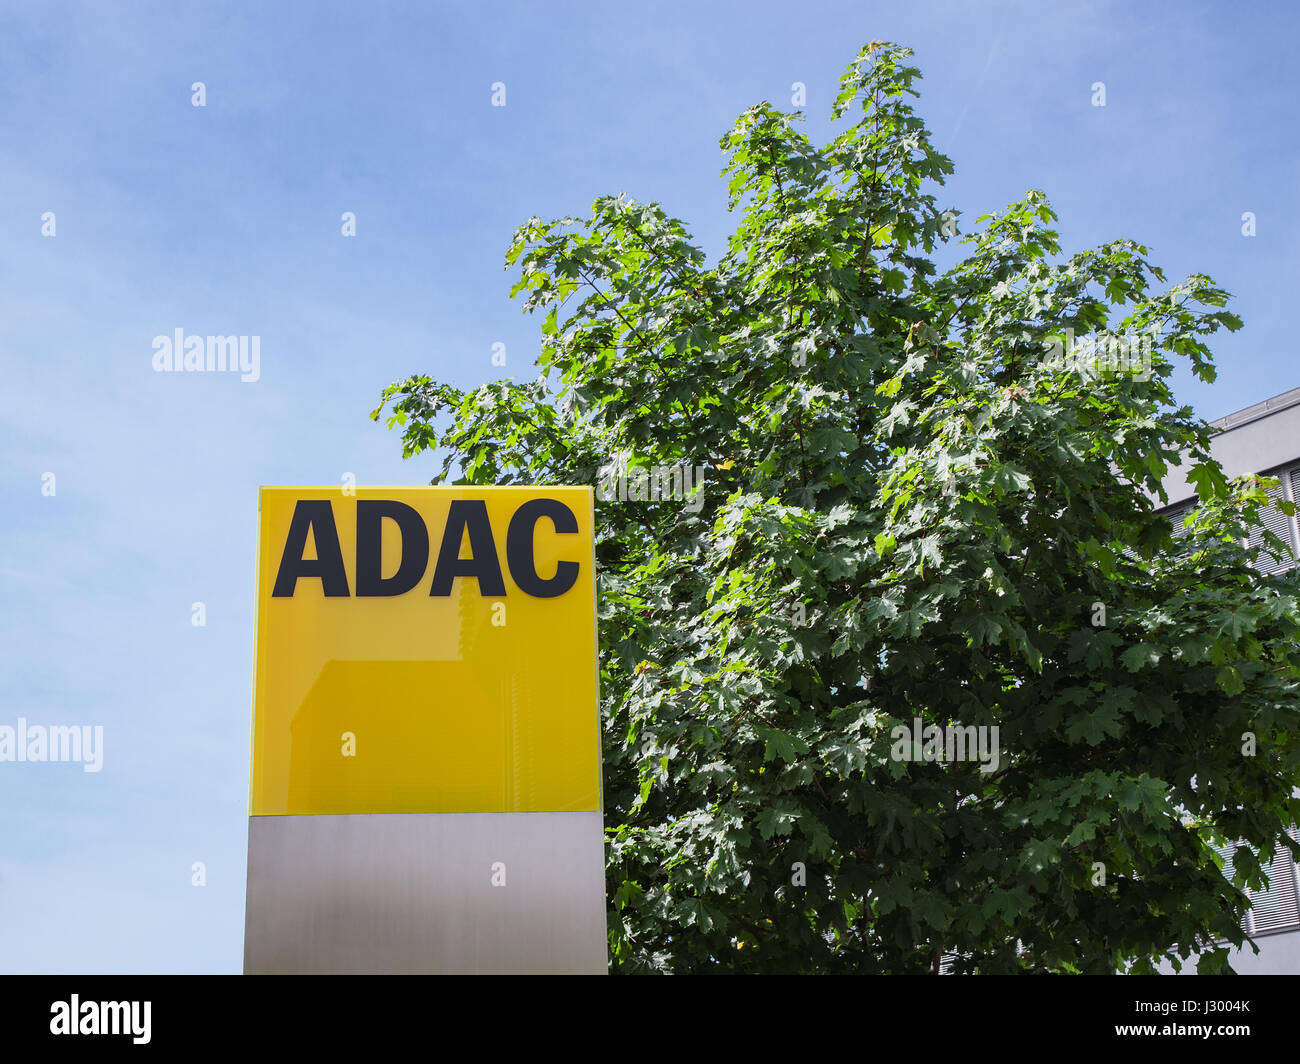 Munich, Germany - May 12, 2015: ADAC signage with German automobile club logo largest automobile association in Europe. Stock Photo